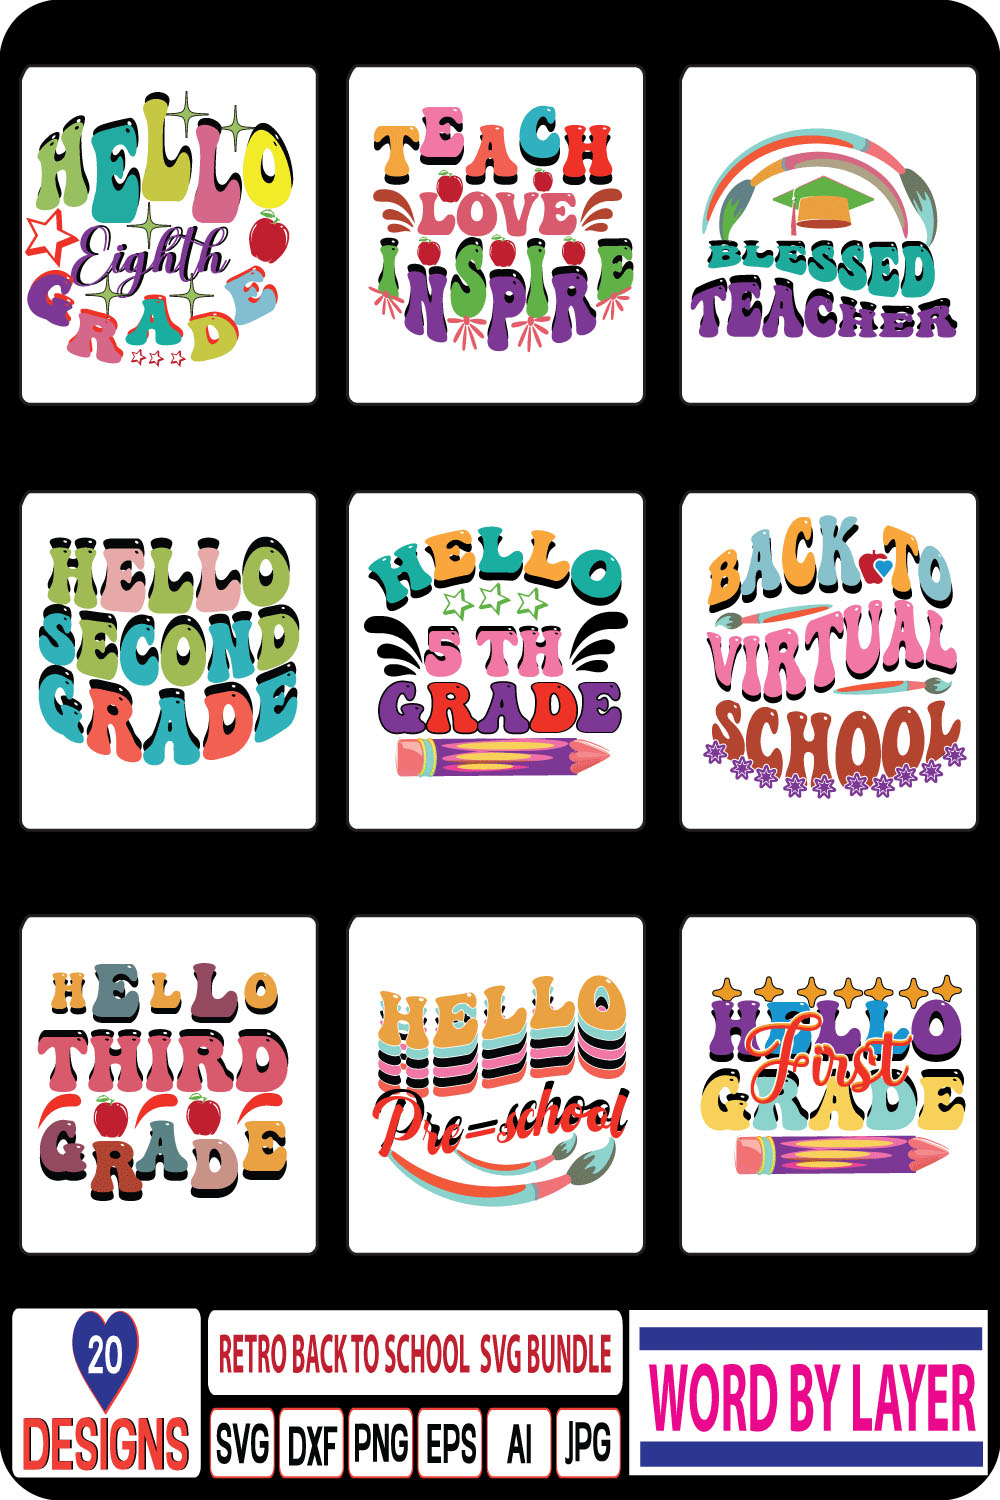 A selection of bright images for prints on the theme of returning to school.